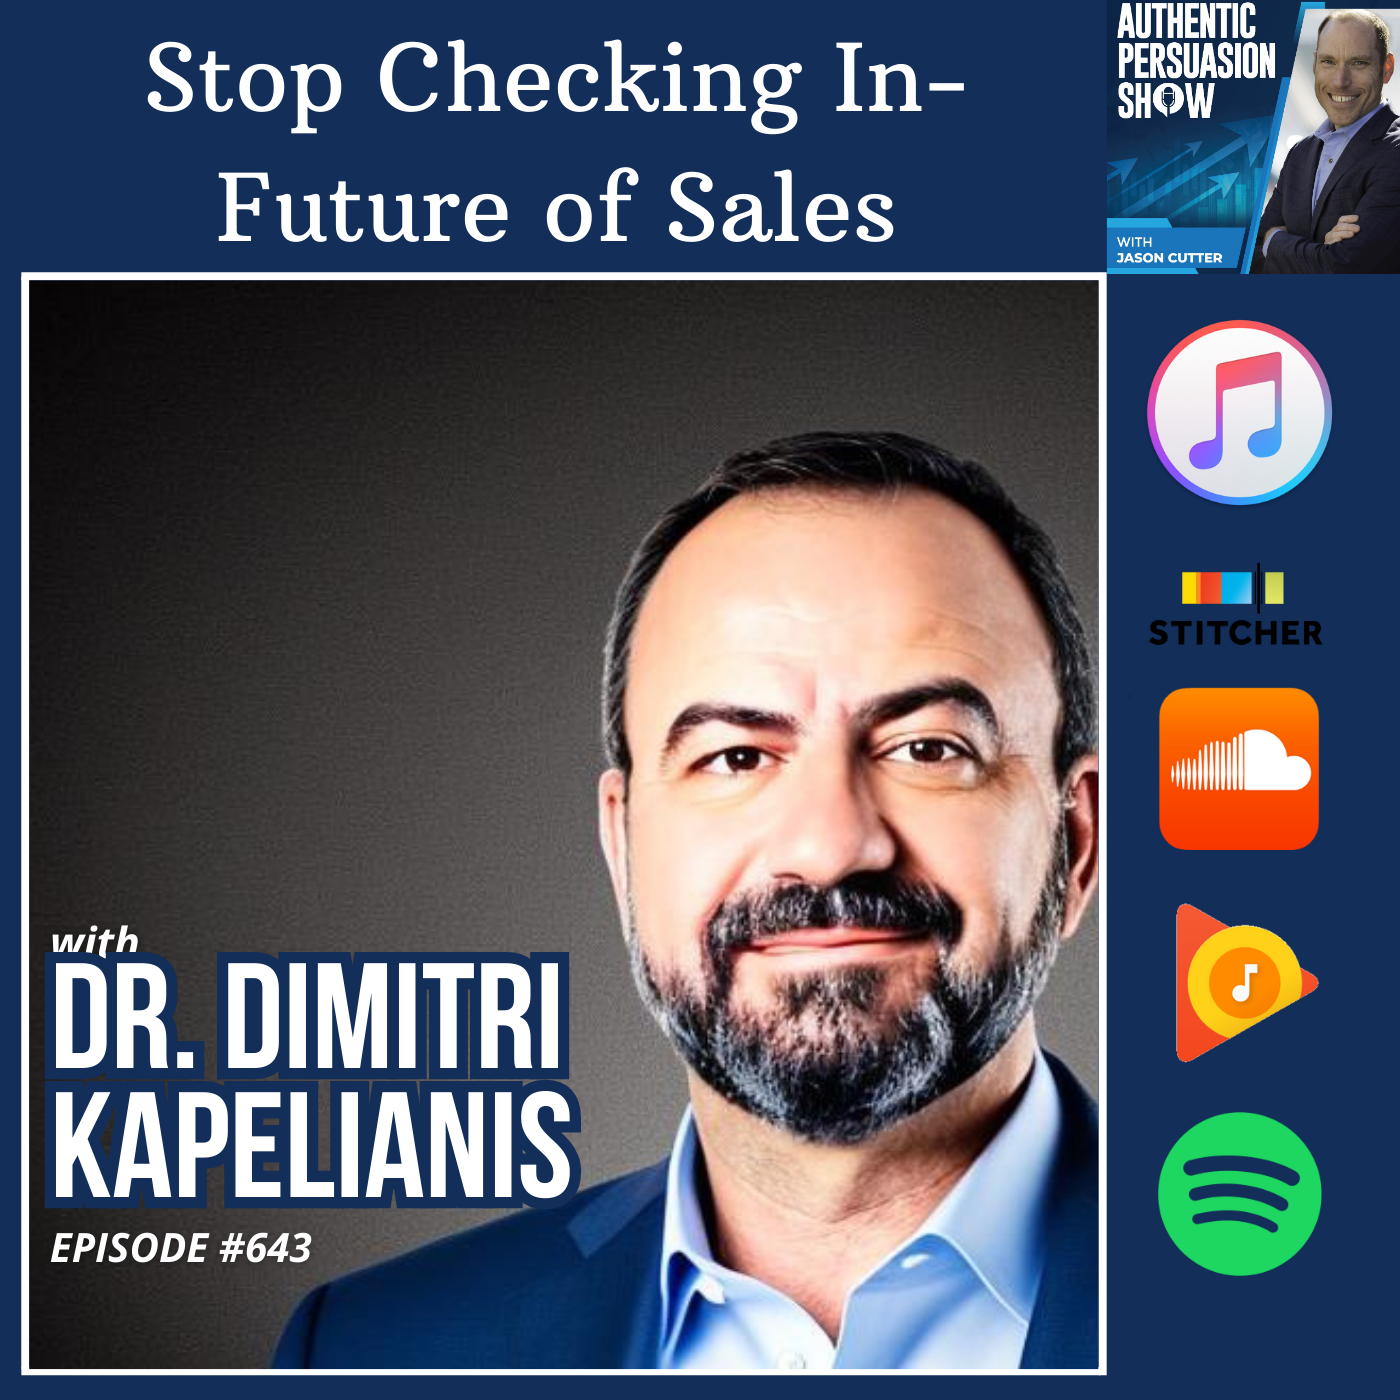 [643] Stop Checking In - Future of Sales, with Dr. Dimitri Kapelianis from University of New Mexico